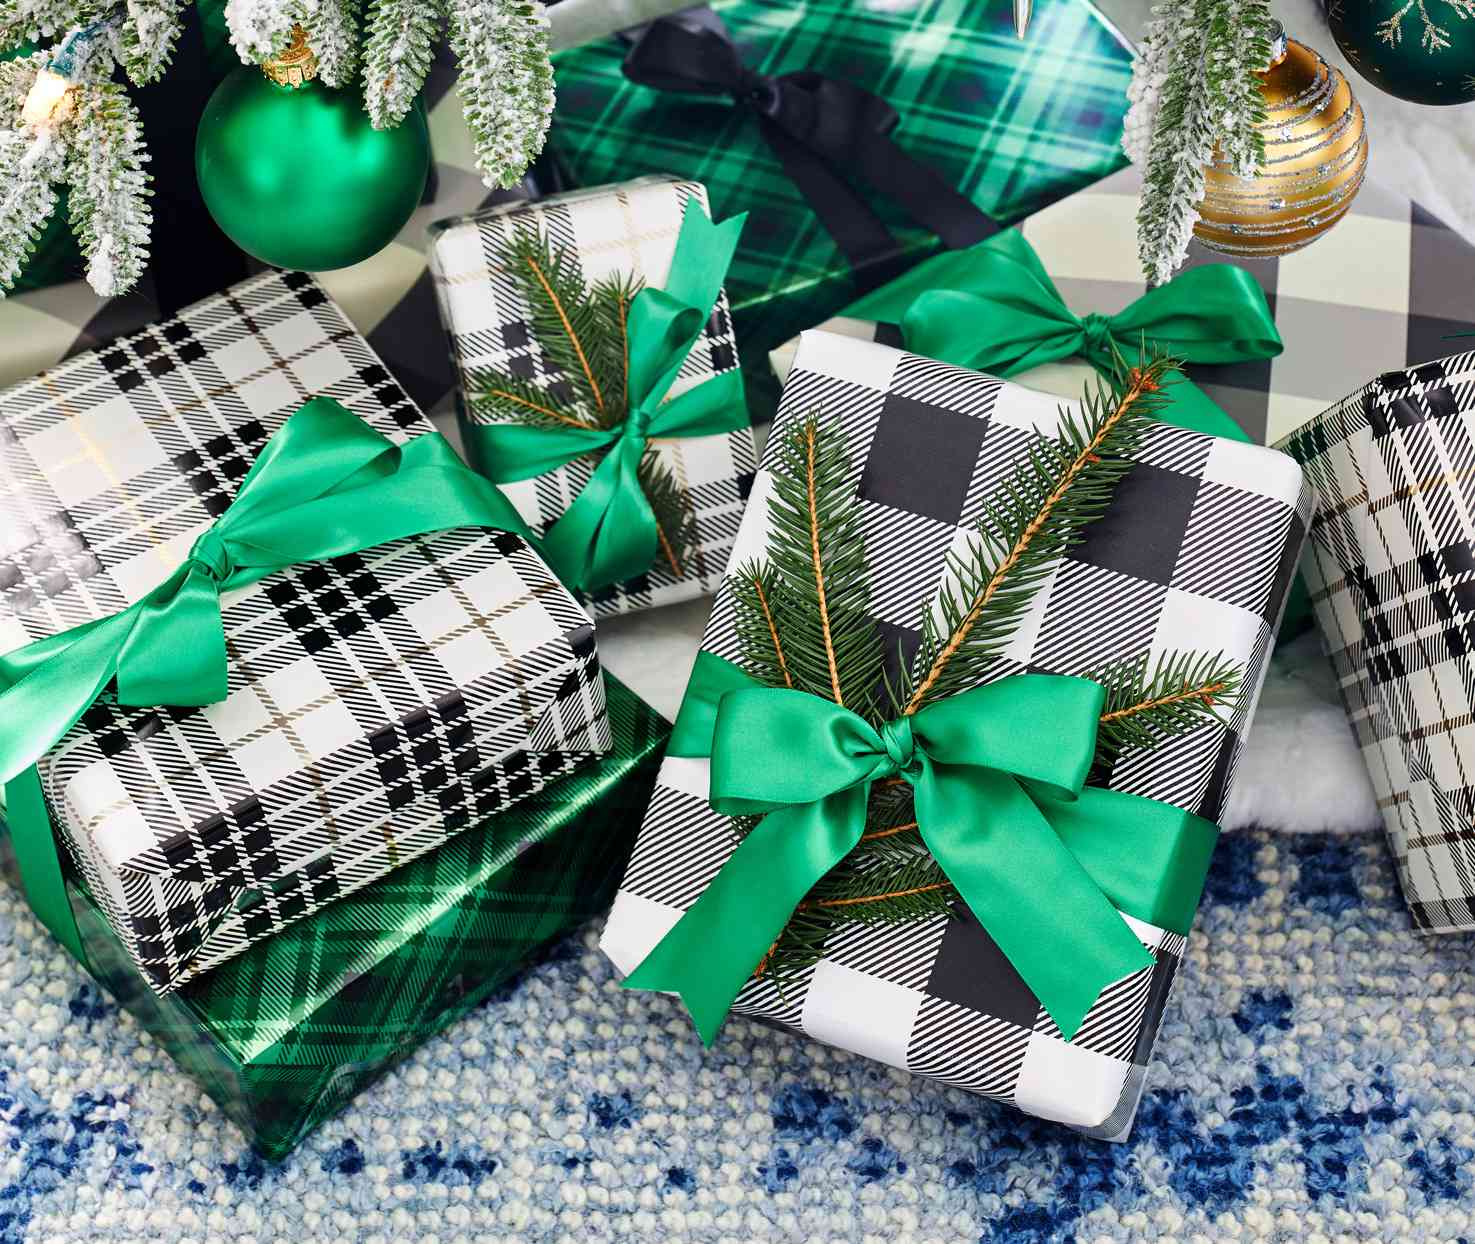 pile of gifts under holiday tree wrapped in plaid paper and green ribbons